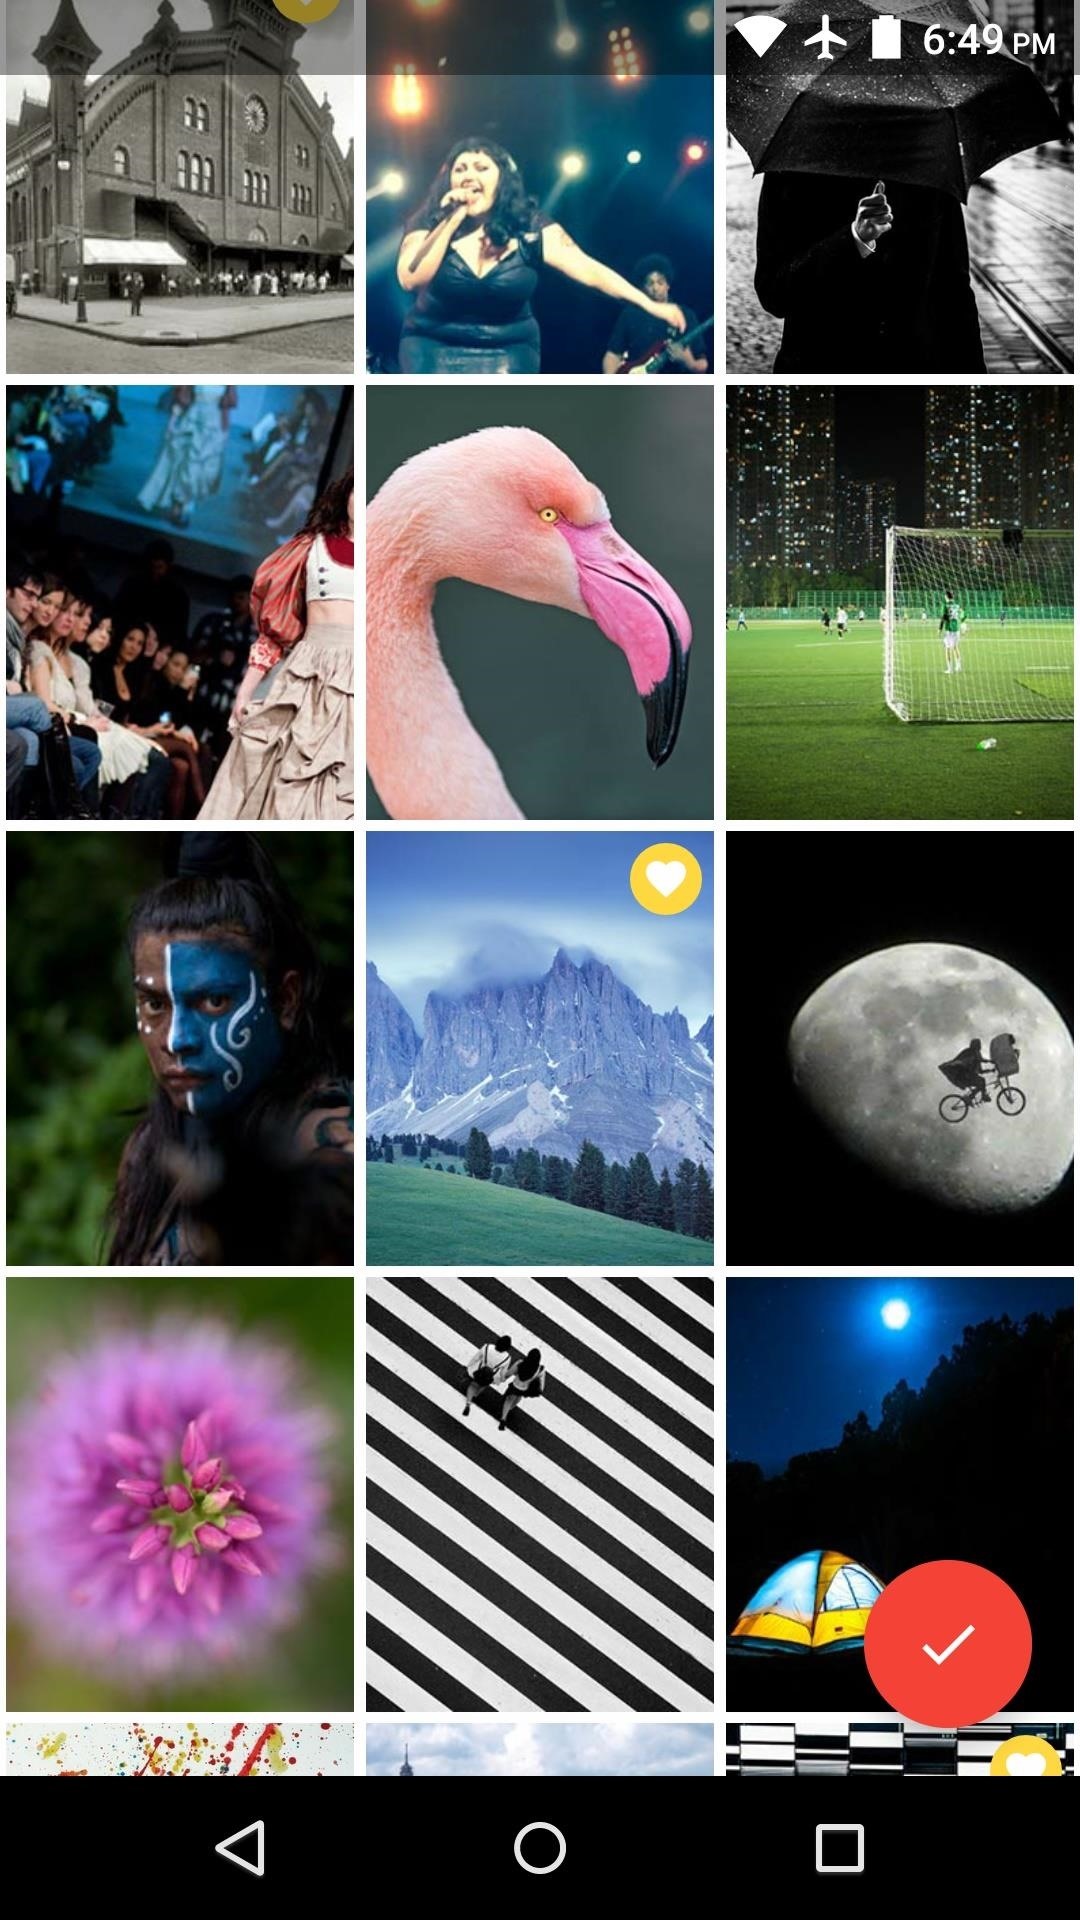 TapDeck Is a Beautiful Live Wallpaper That Adapts to Your Taste in Photography